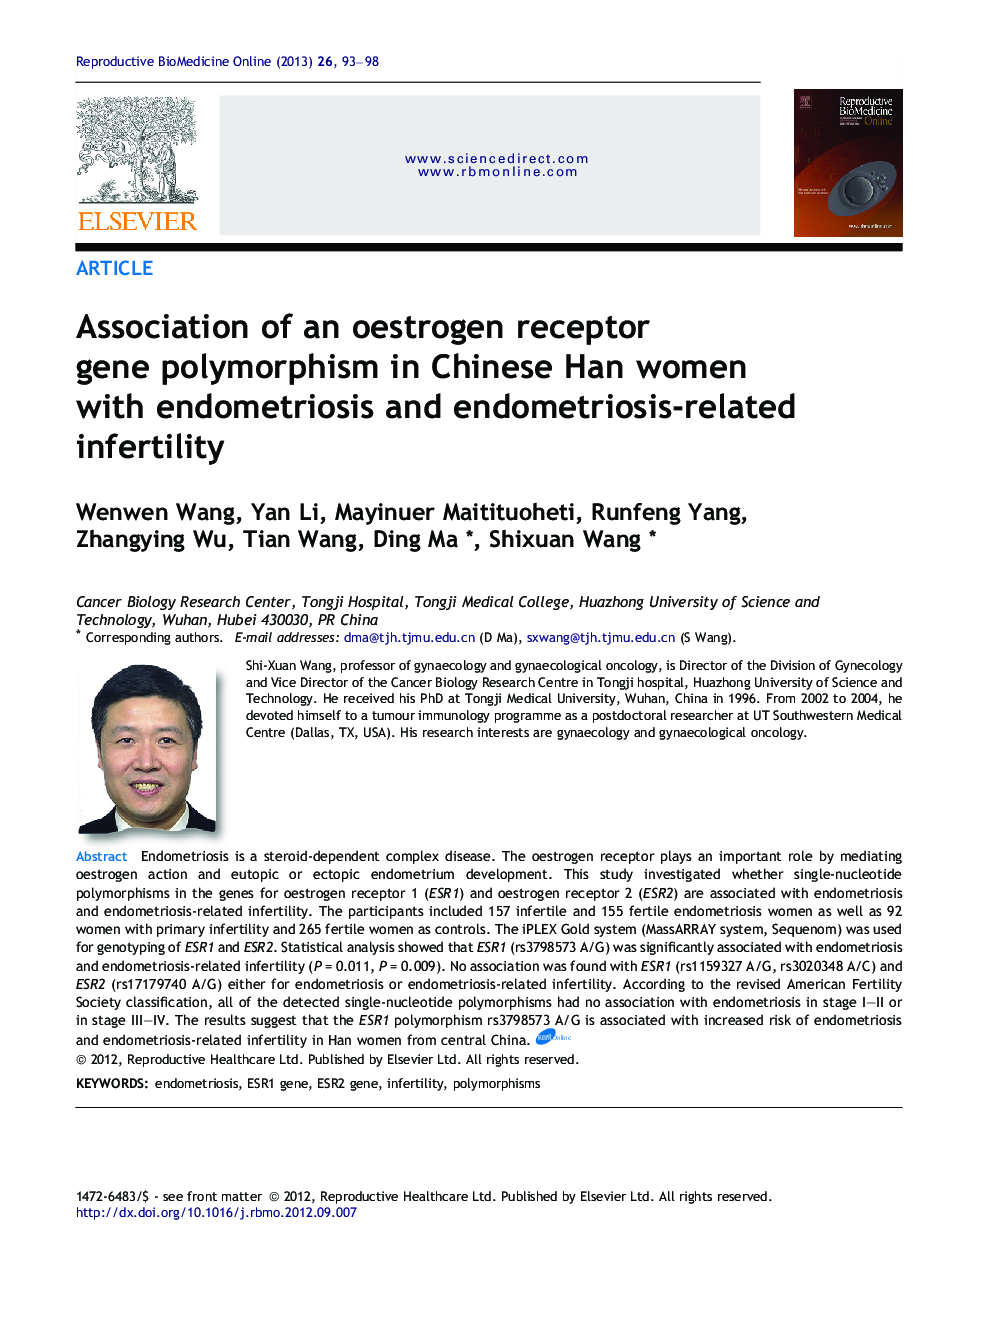 Association of an oestrogen receptor gene polymorphism in Chinese Han women with endometriosis and endometriosis-related infertility 